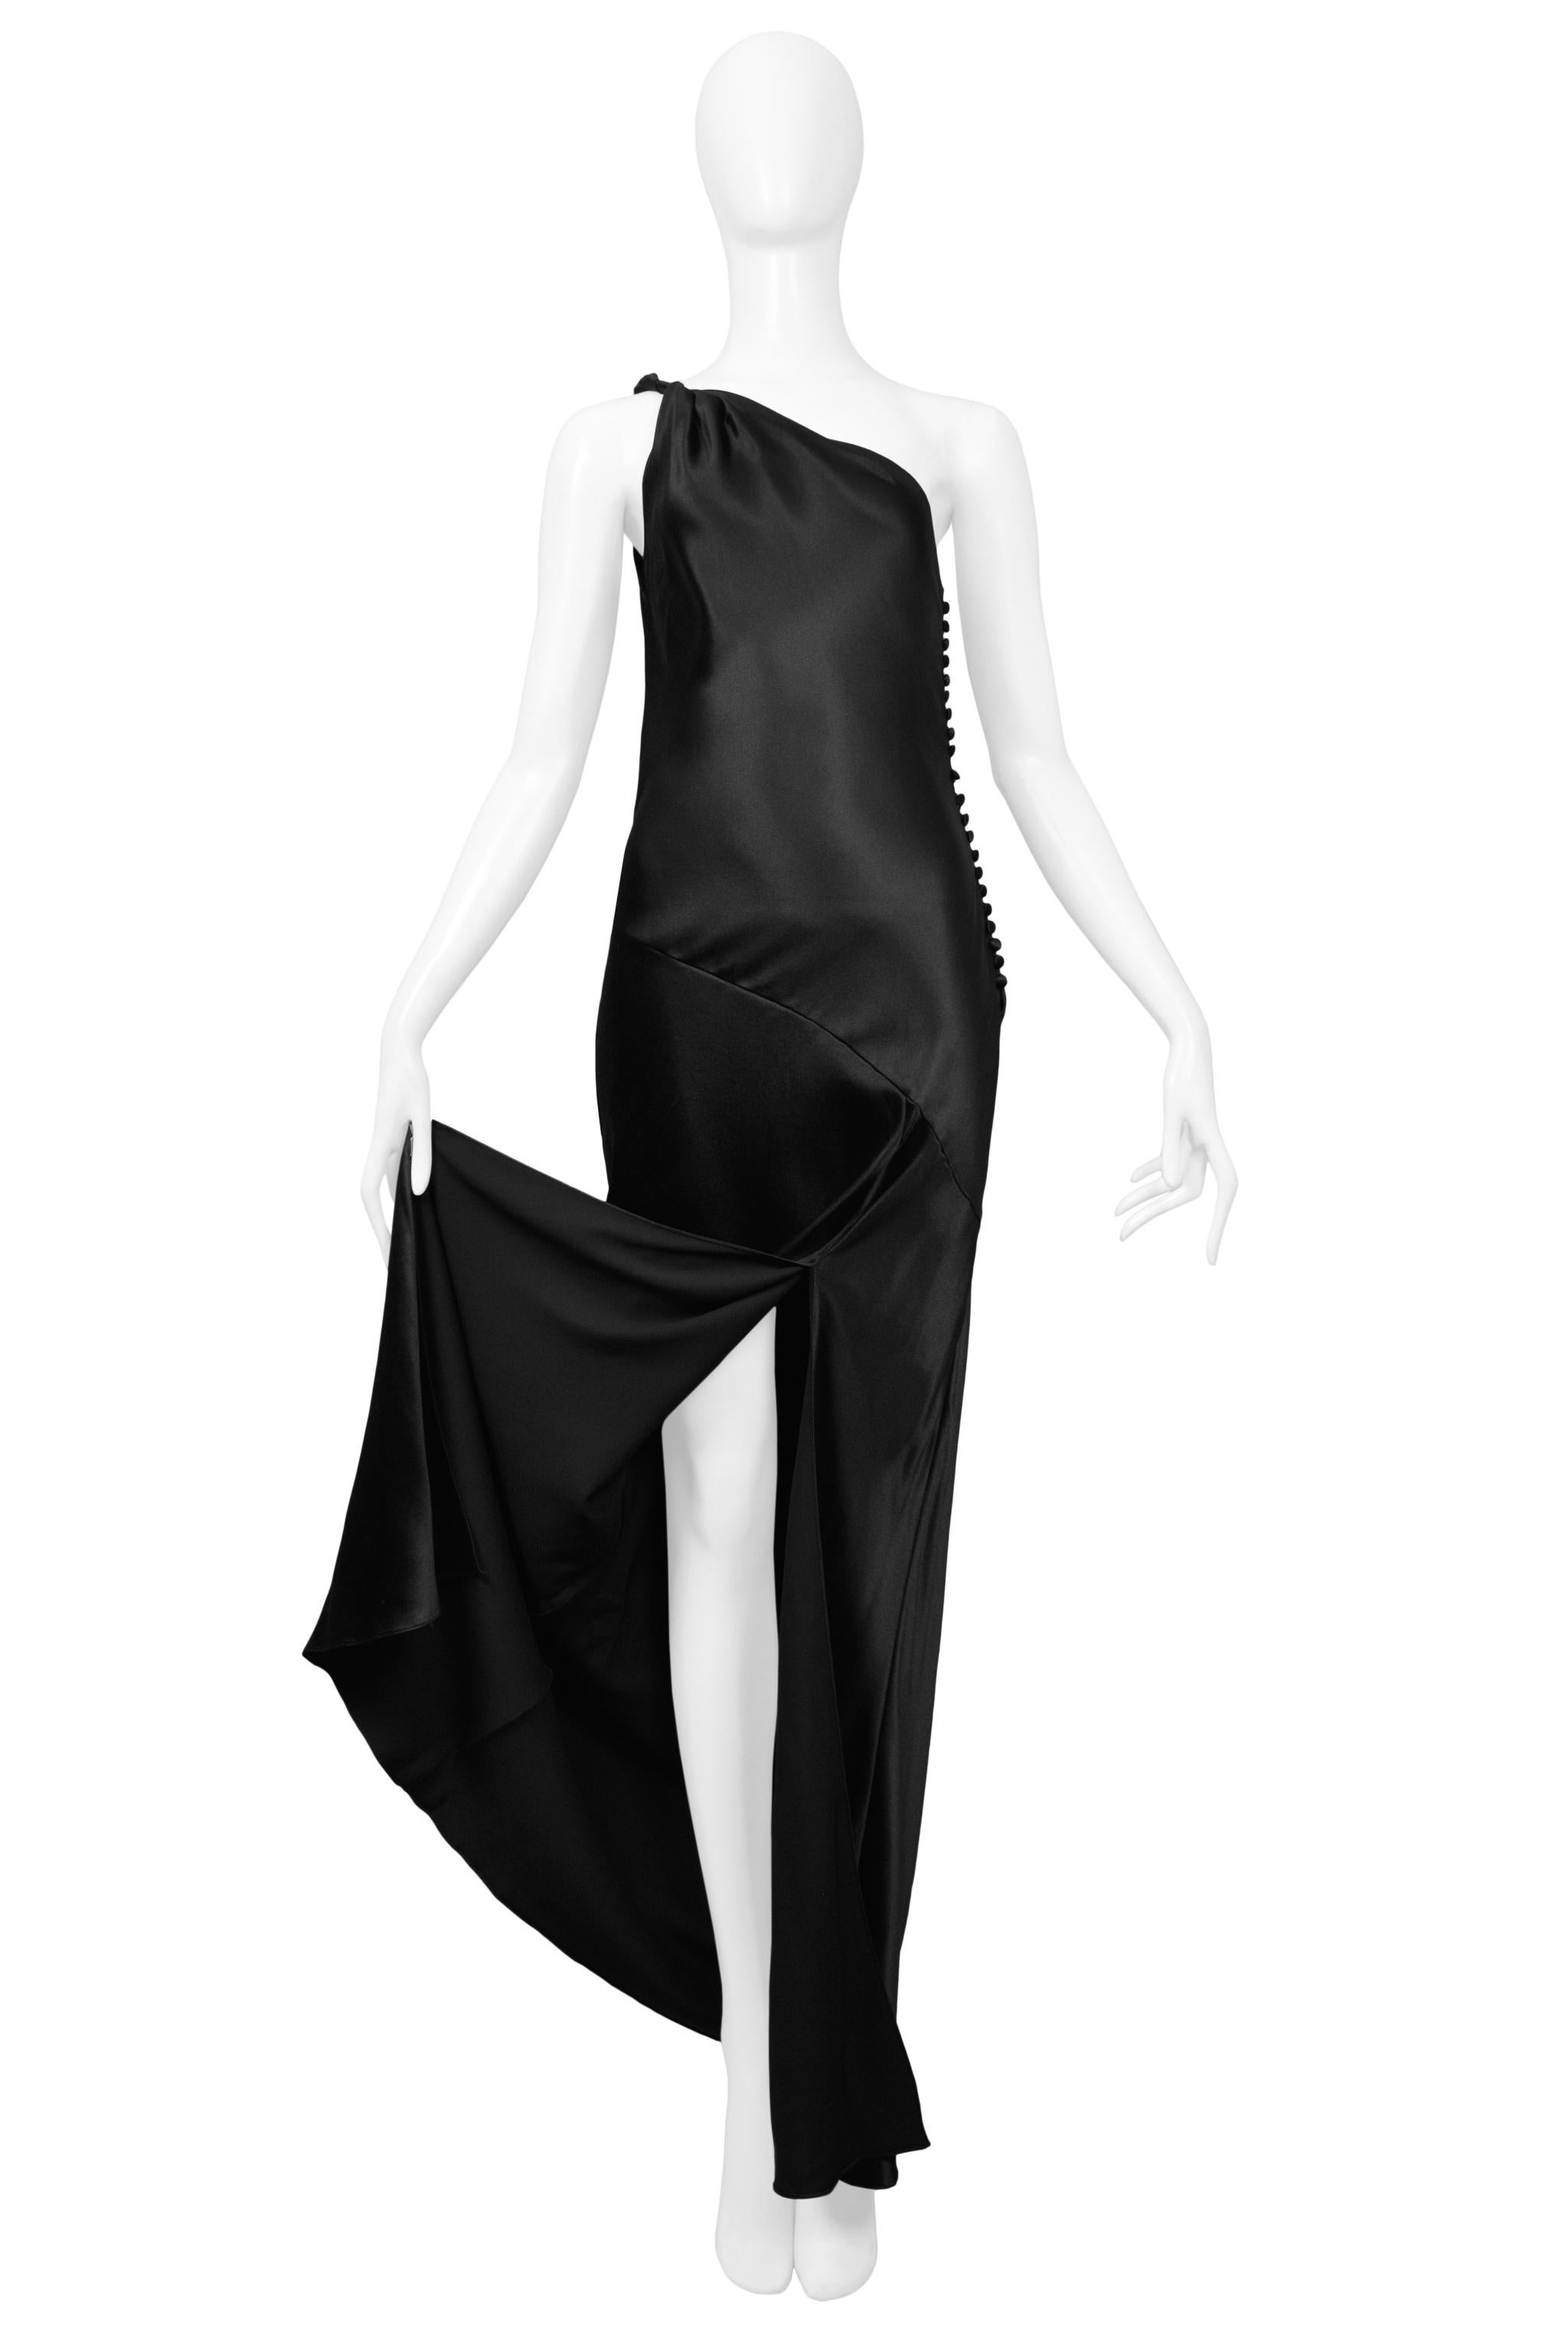 Resurrection Vintage is pleased to offer a vintage Christian Dior by John Galliano black silk asymmetrical bias cut gown featuring side button closure and a dramatic front slit. 

John Galliano 
Size 36
2001 Collection
Satin
Excellent Vintage